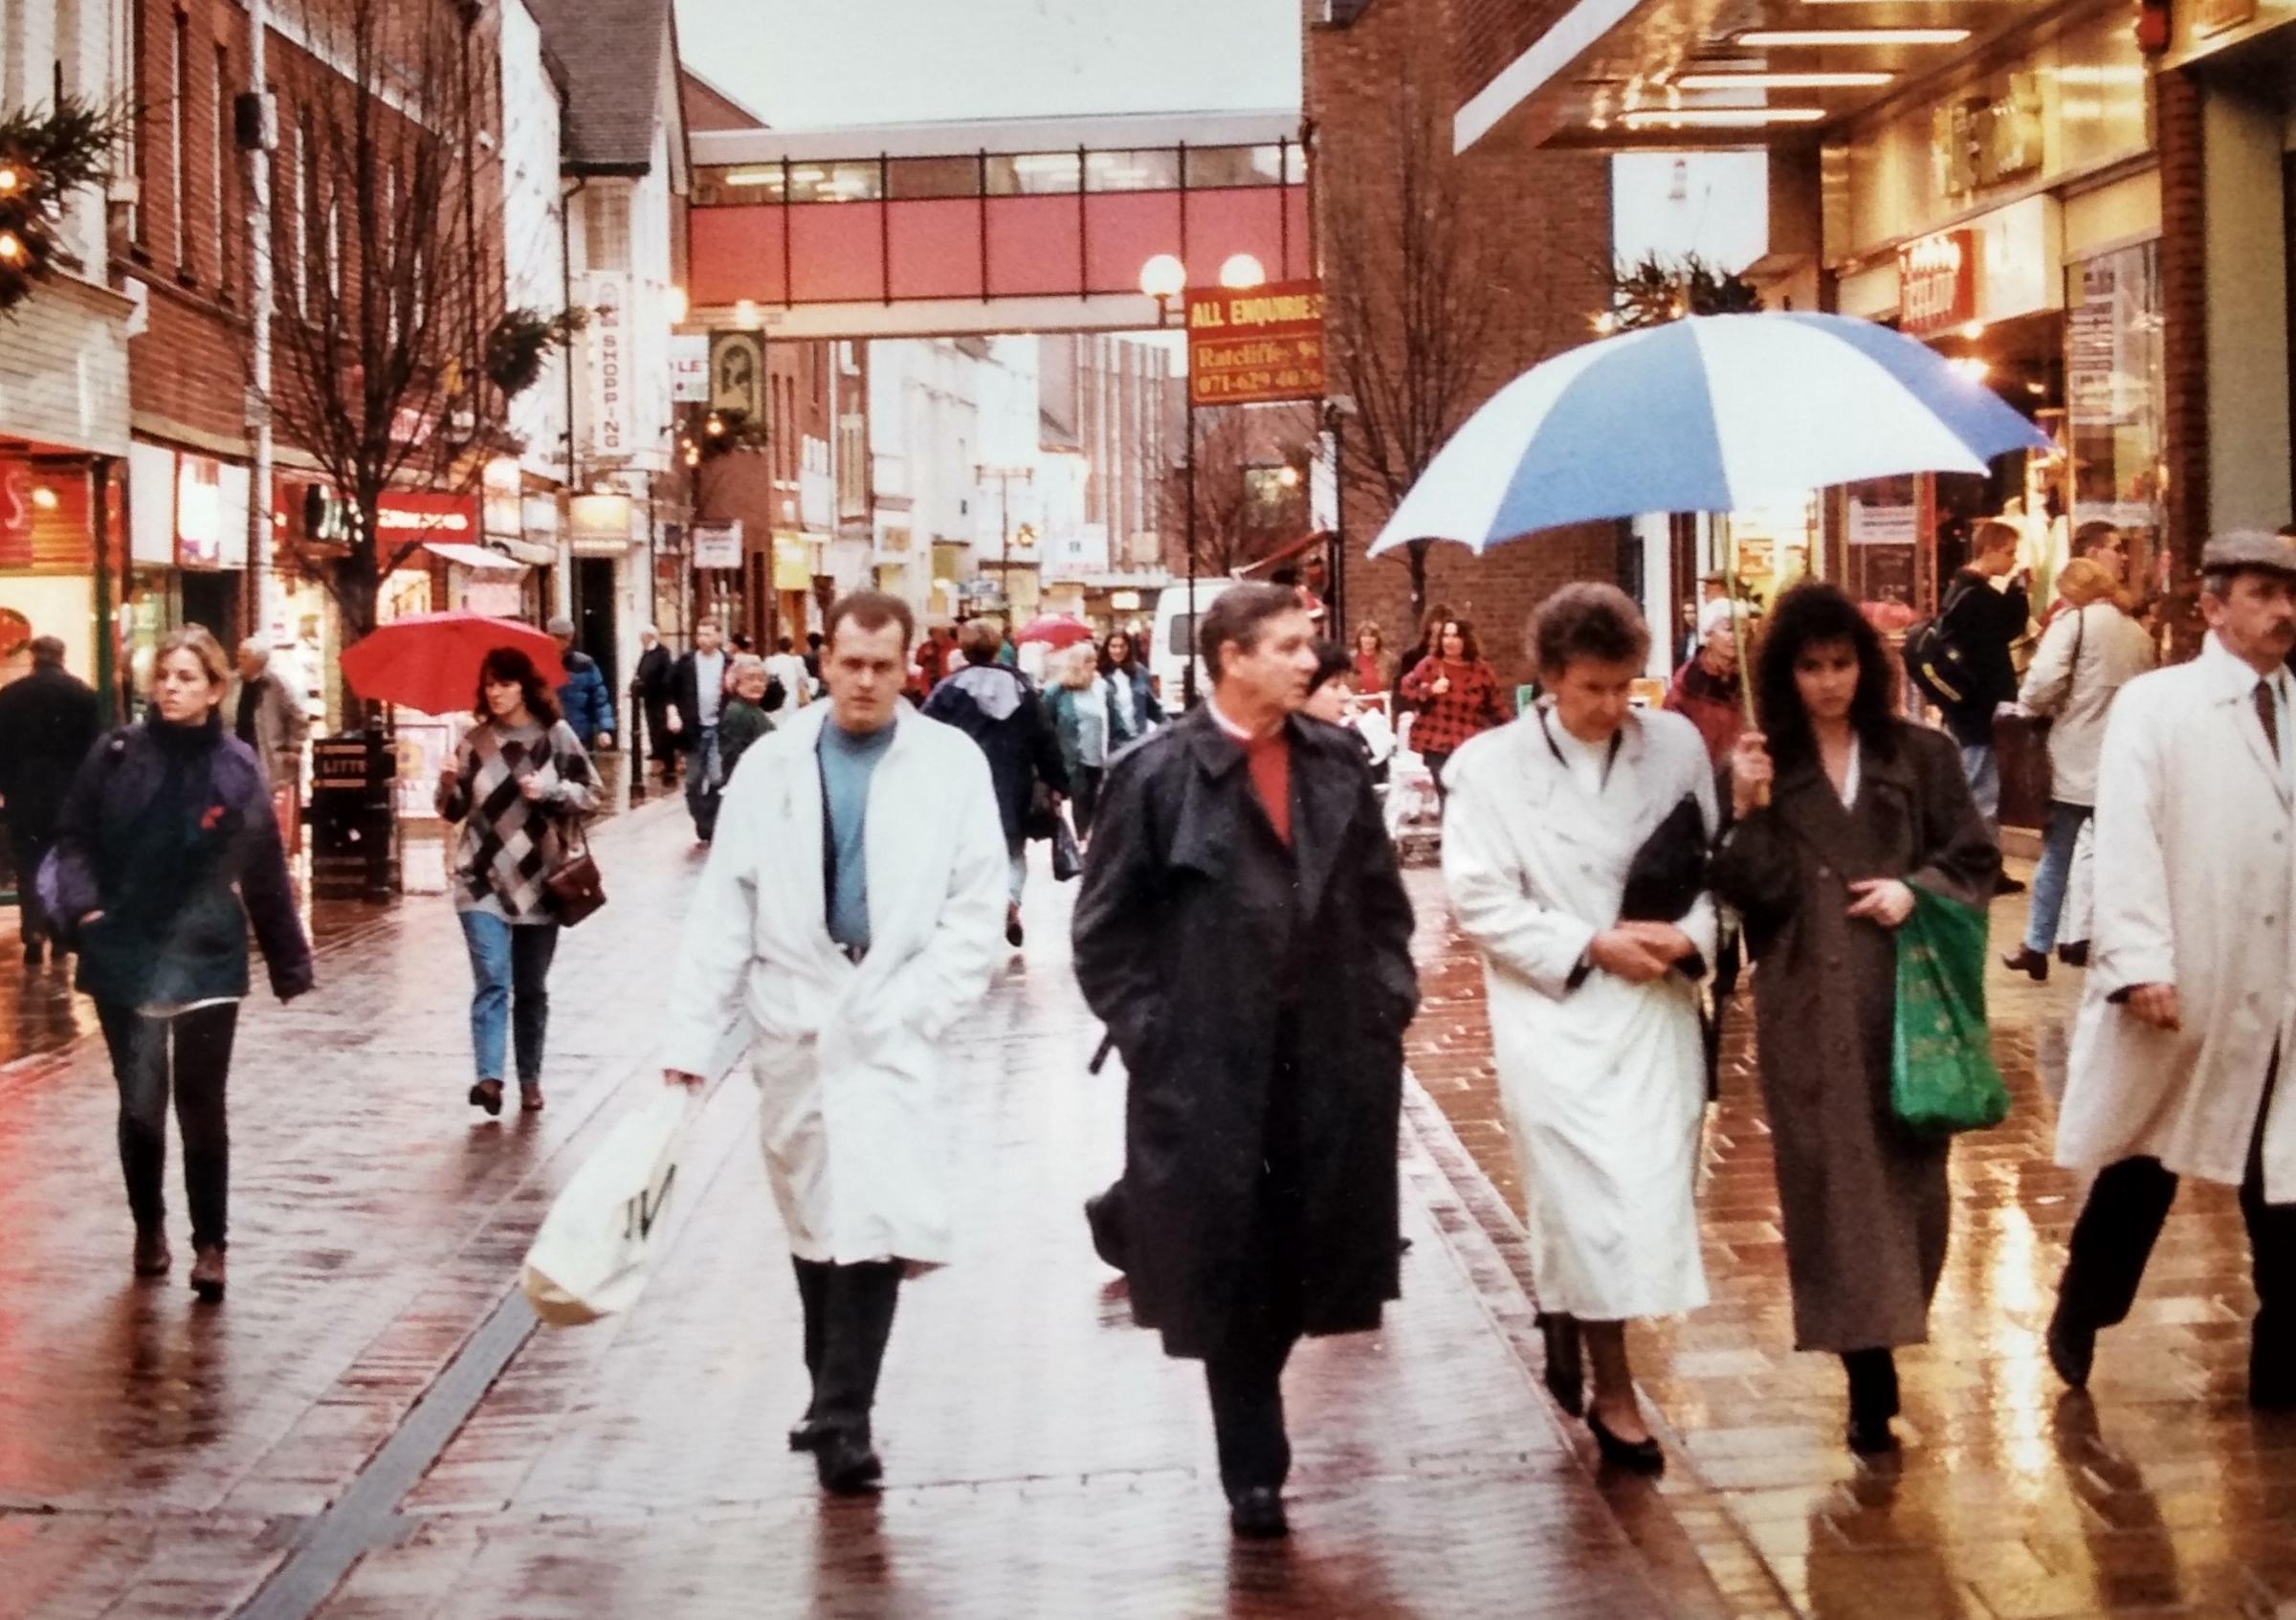 The Shambles busy with shoppers in the run-up to Christmas 1994. Note the festive weather